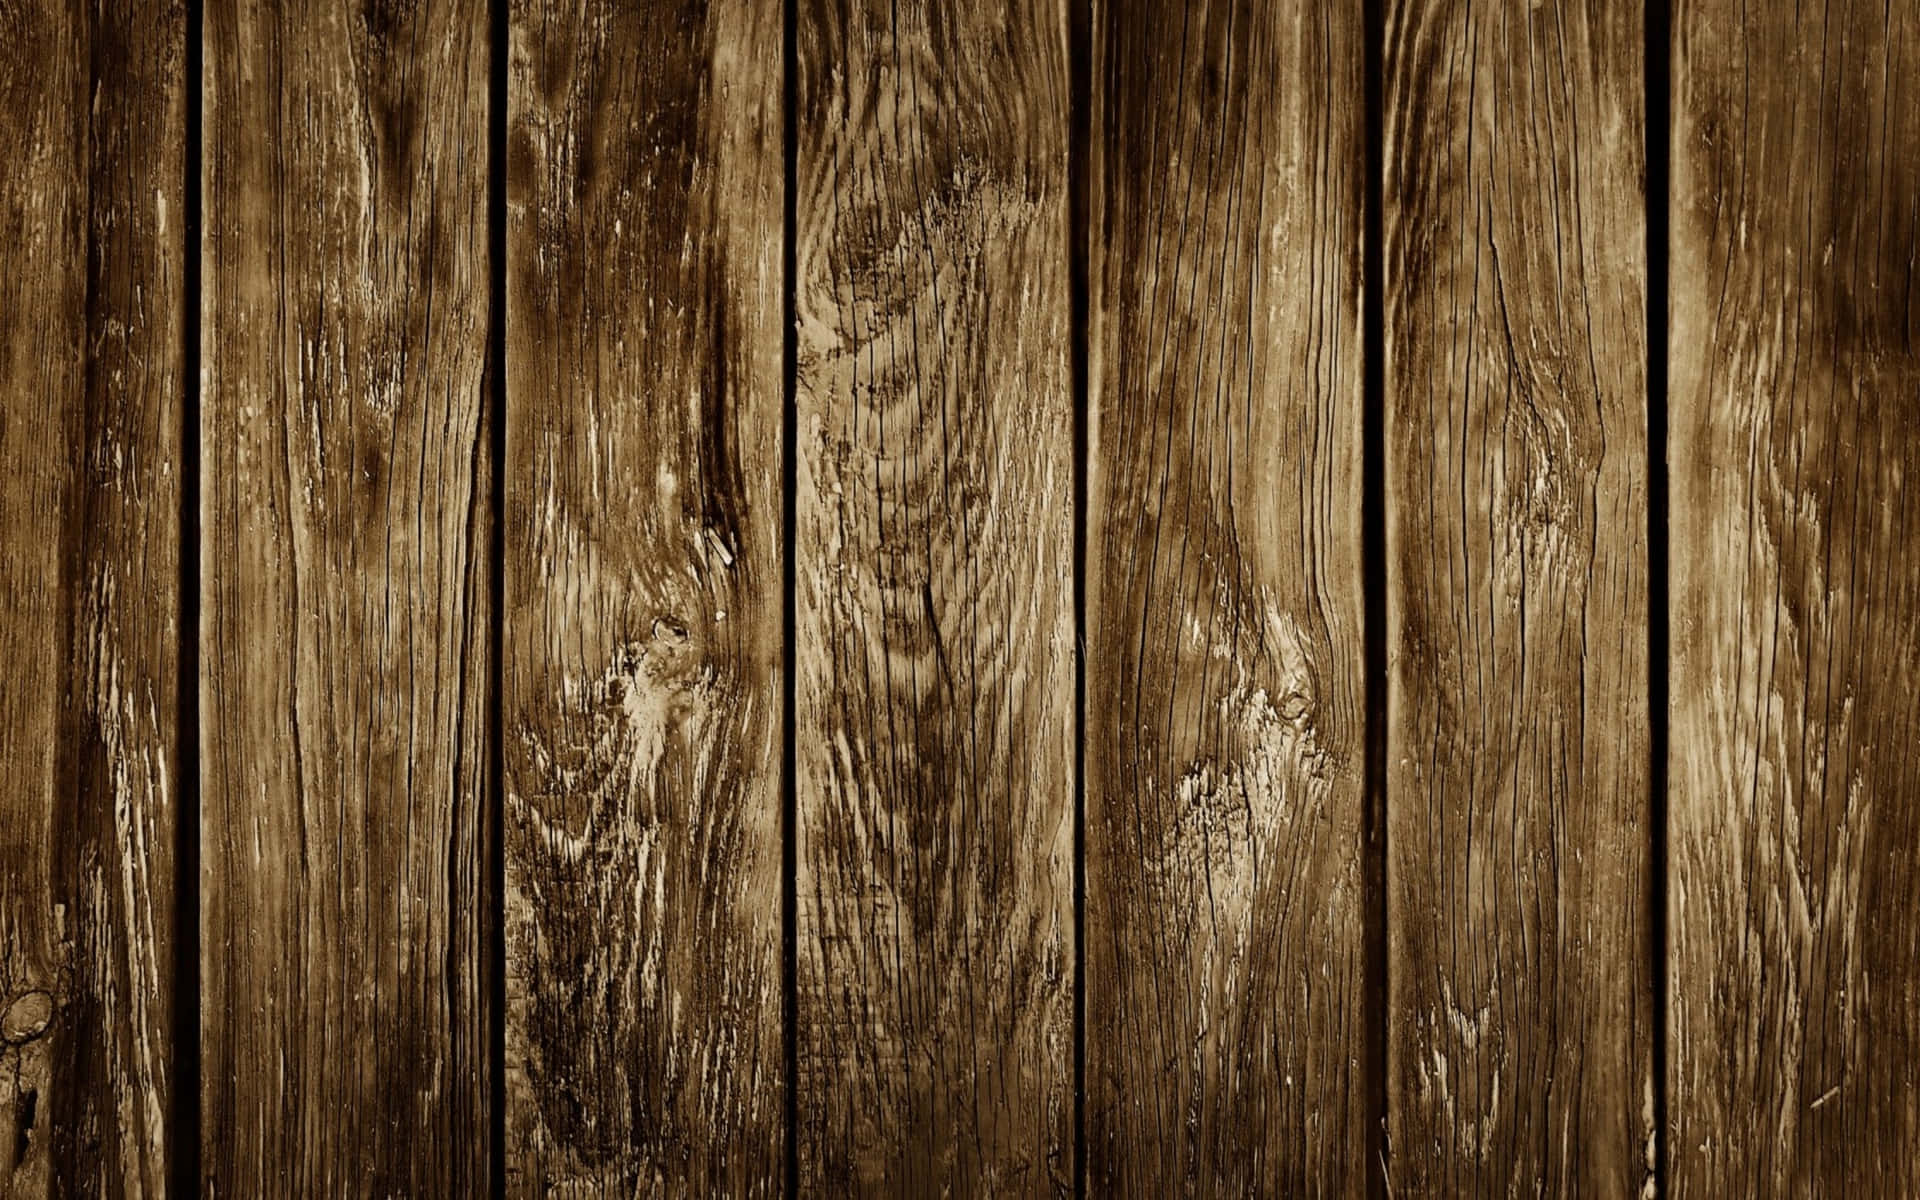 Rustic Wooden Plank Textures Rich in High Resolution